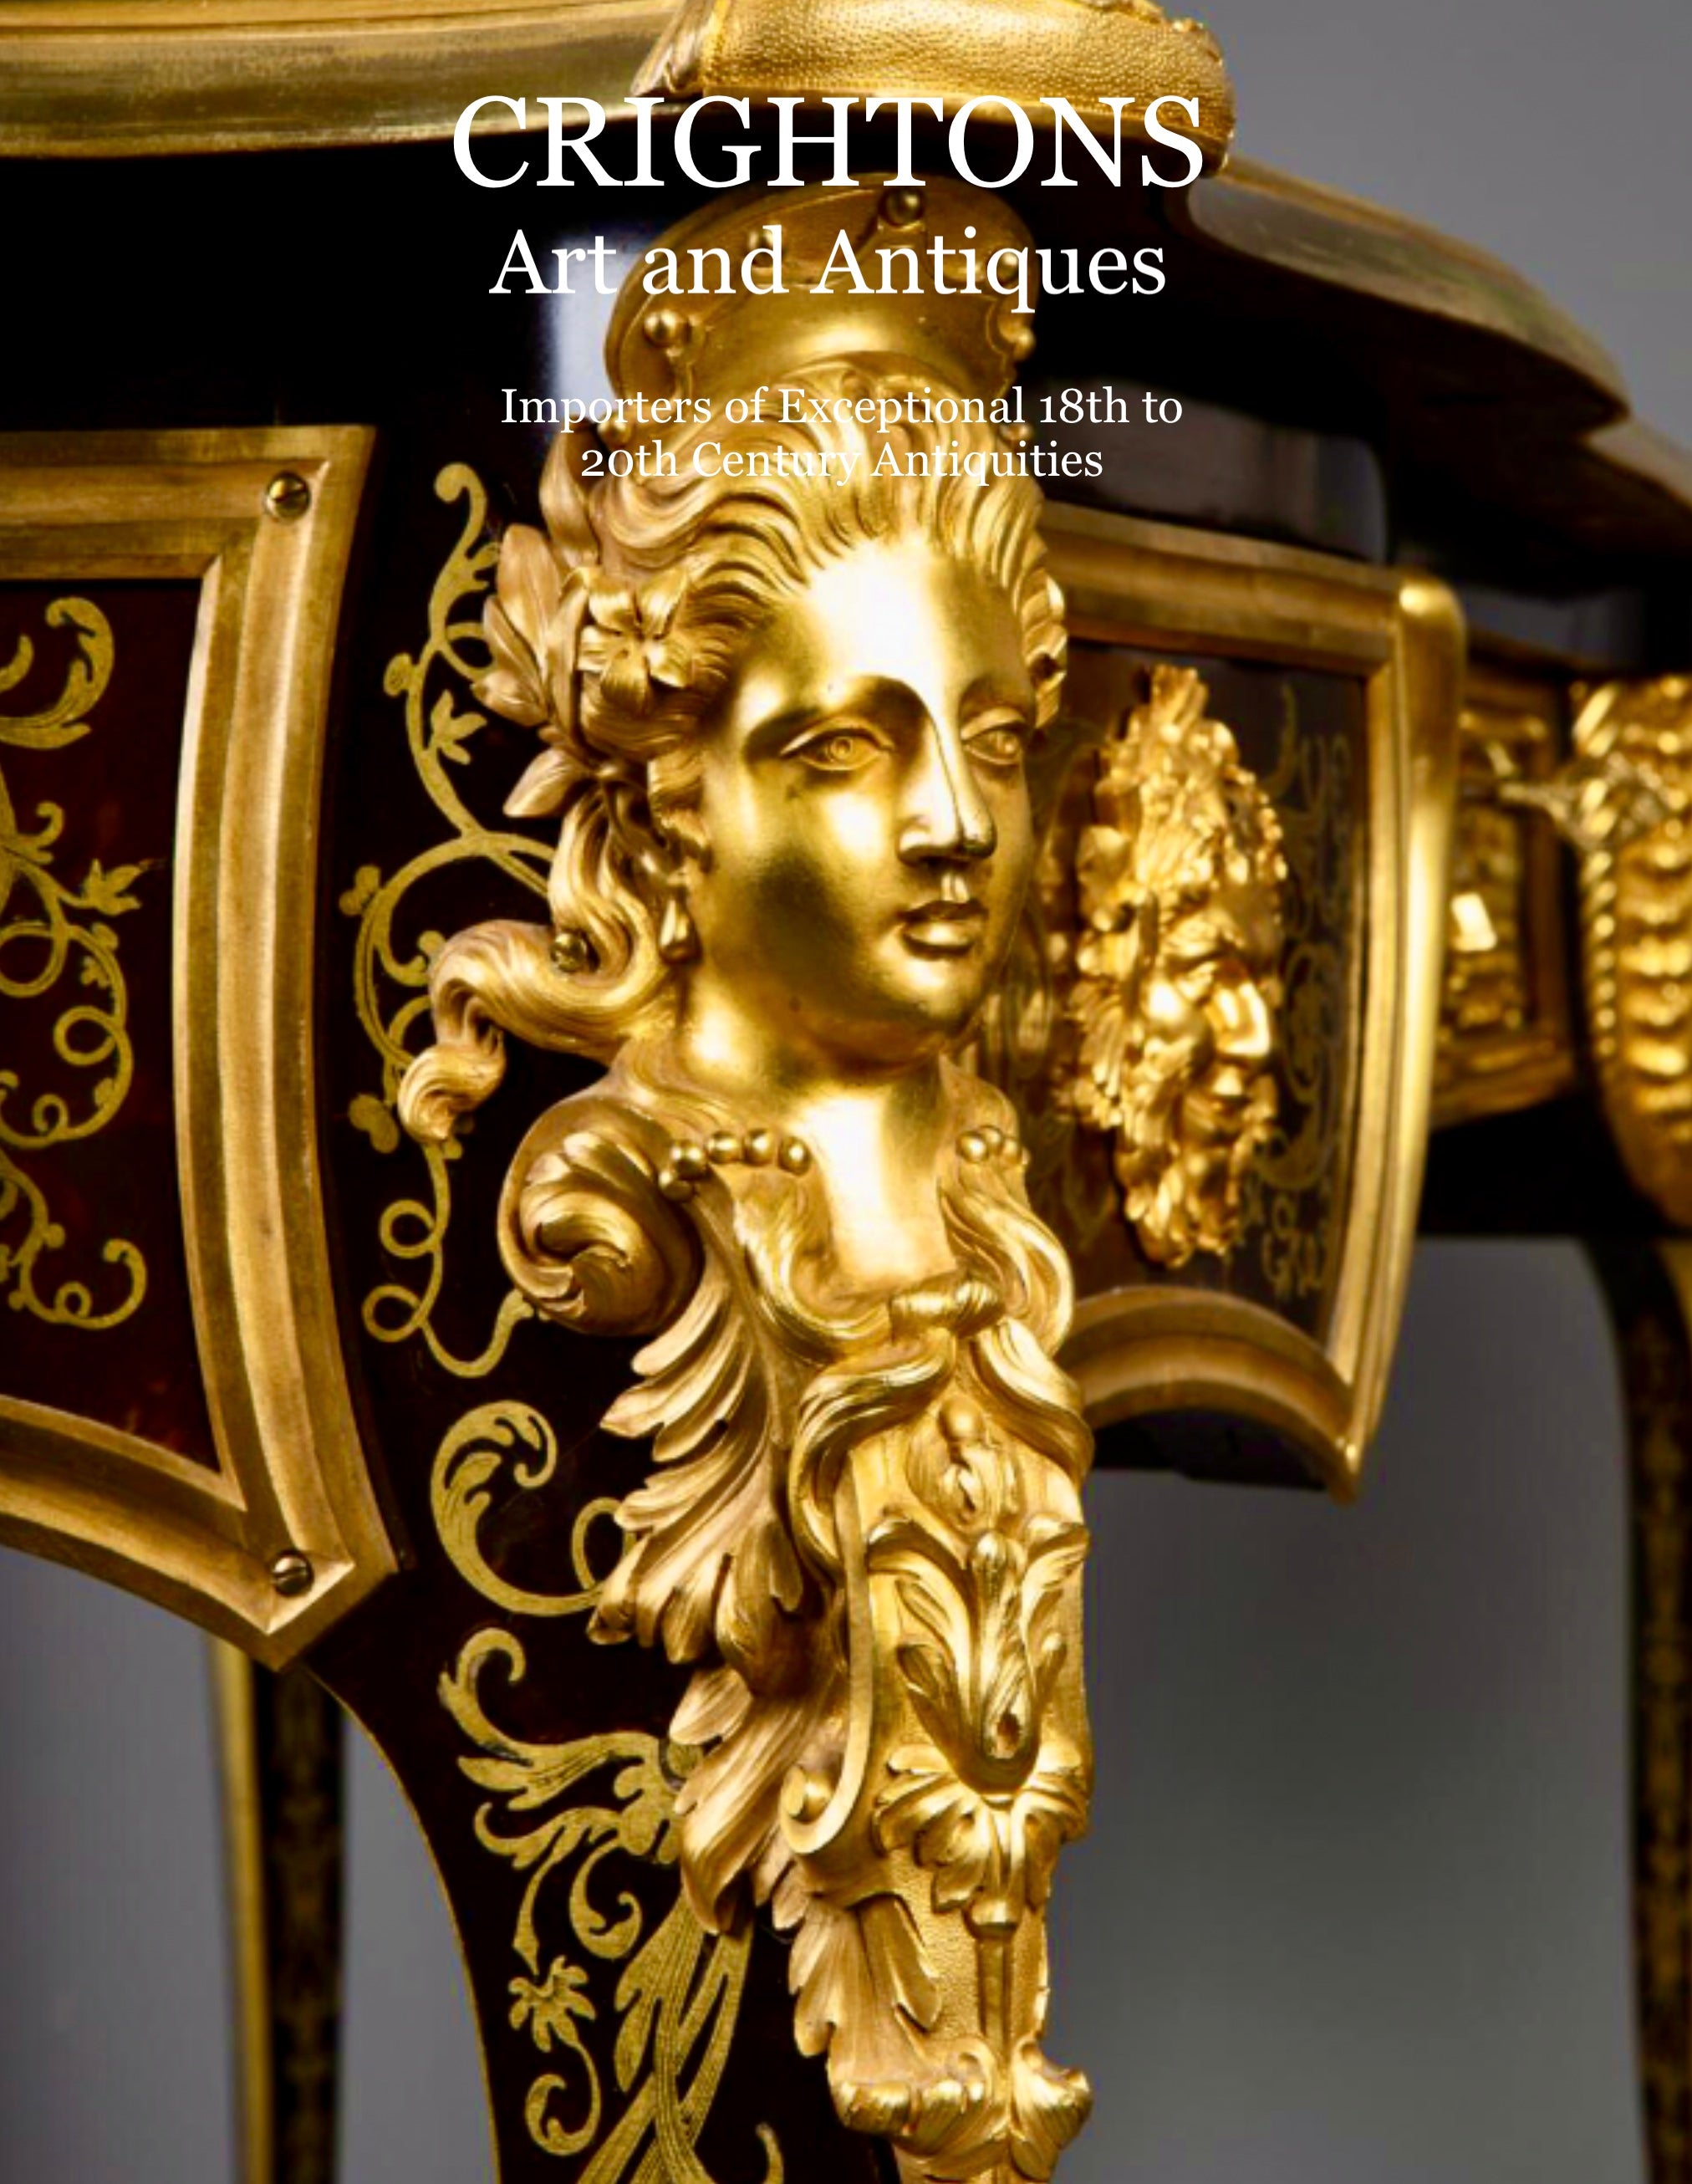 Crightons Fine Art and Antiques